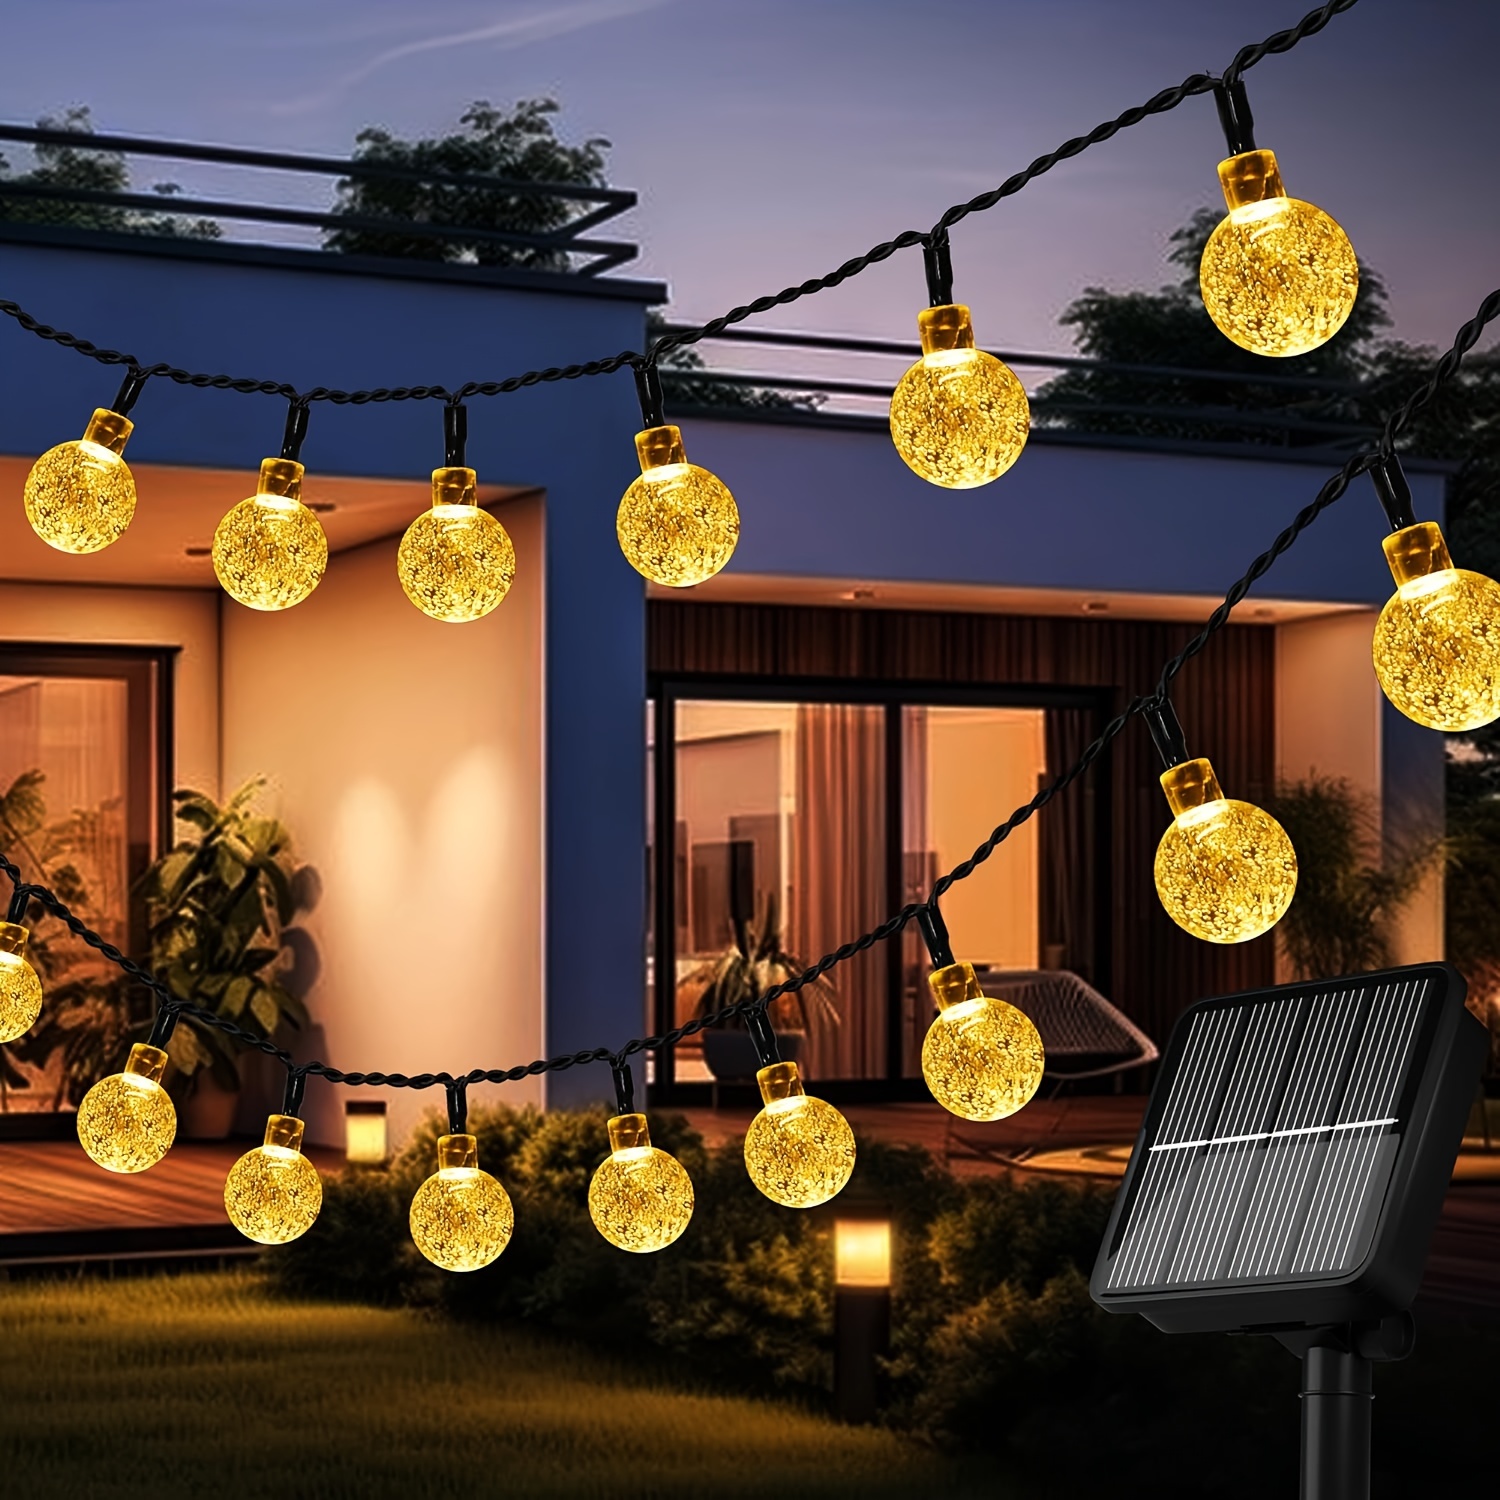 

1pc 39ft 100 Led Solar String Lights Outdoor, Globe String Lights, Waterproof Crystall Ball Lights Solar Patio Lights With 8 Modes For Garden, Lawn, Patio, Gazebo, Yard, Outdoor